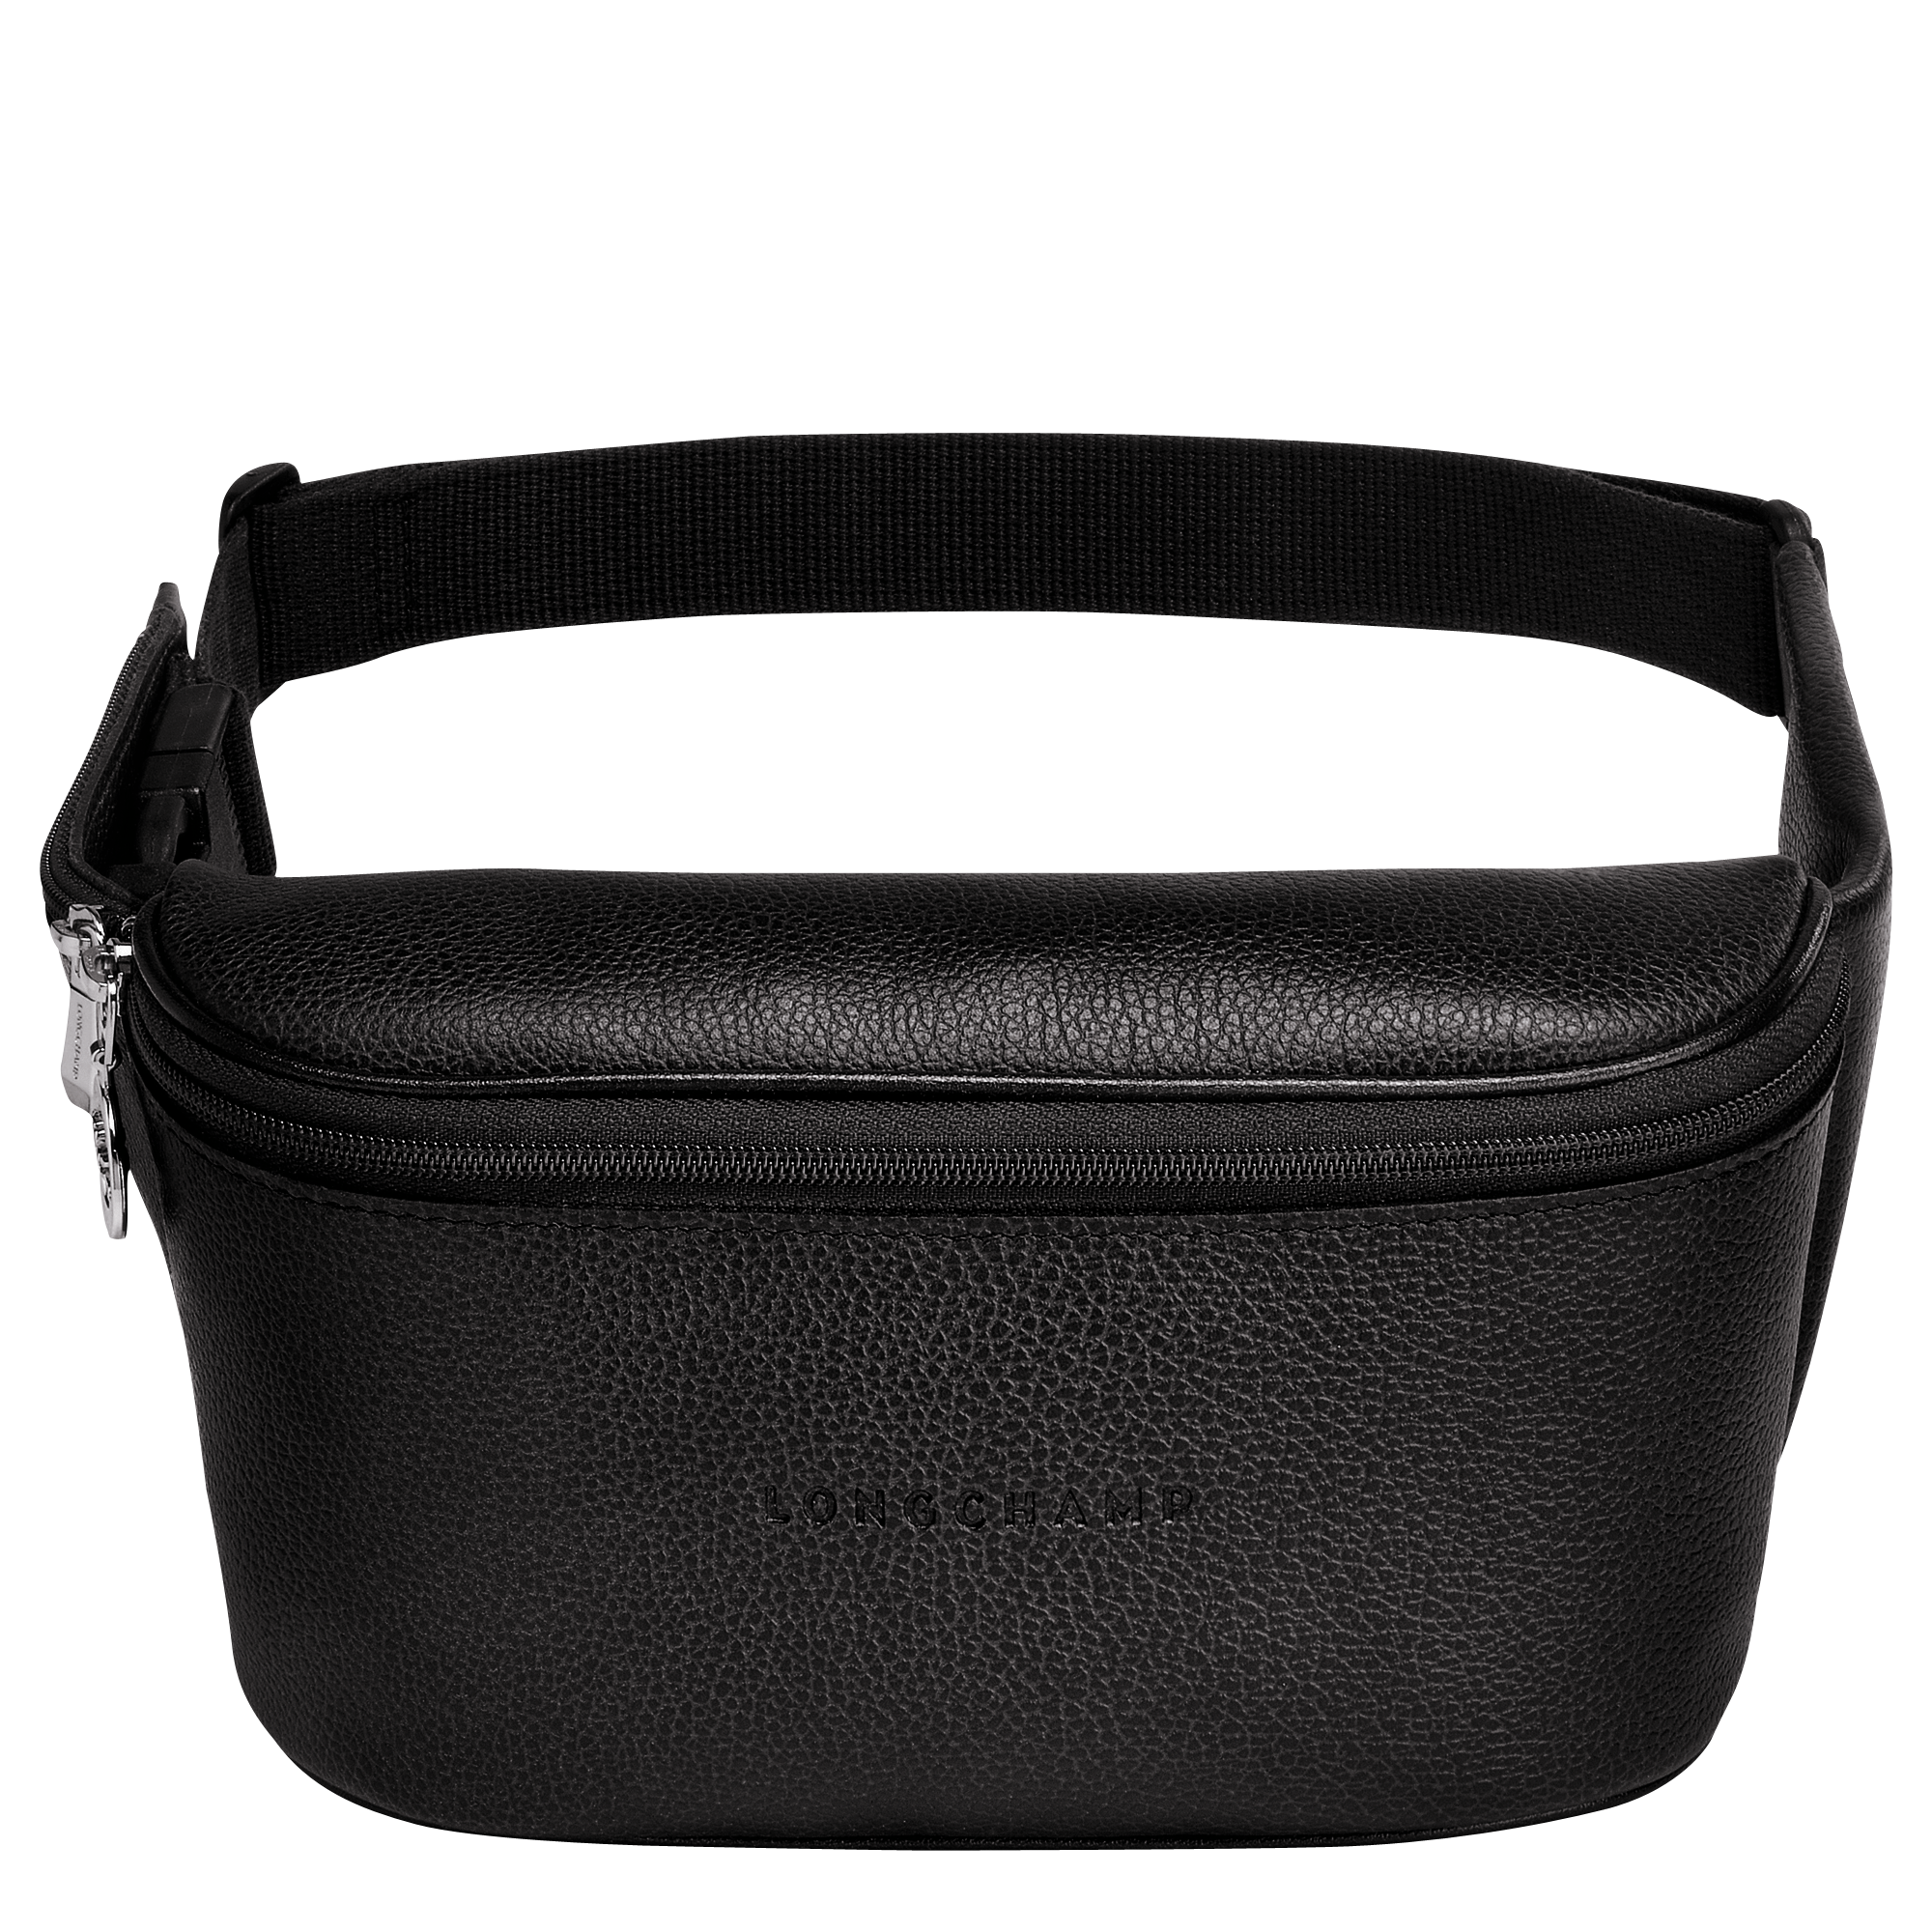 MENS LADIES LEATHER EXTRA LARGE FANNY PACK/WAISTBAG BLACK LAST FEW 